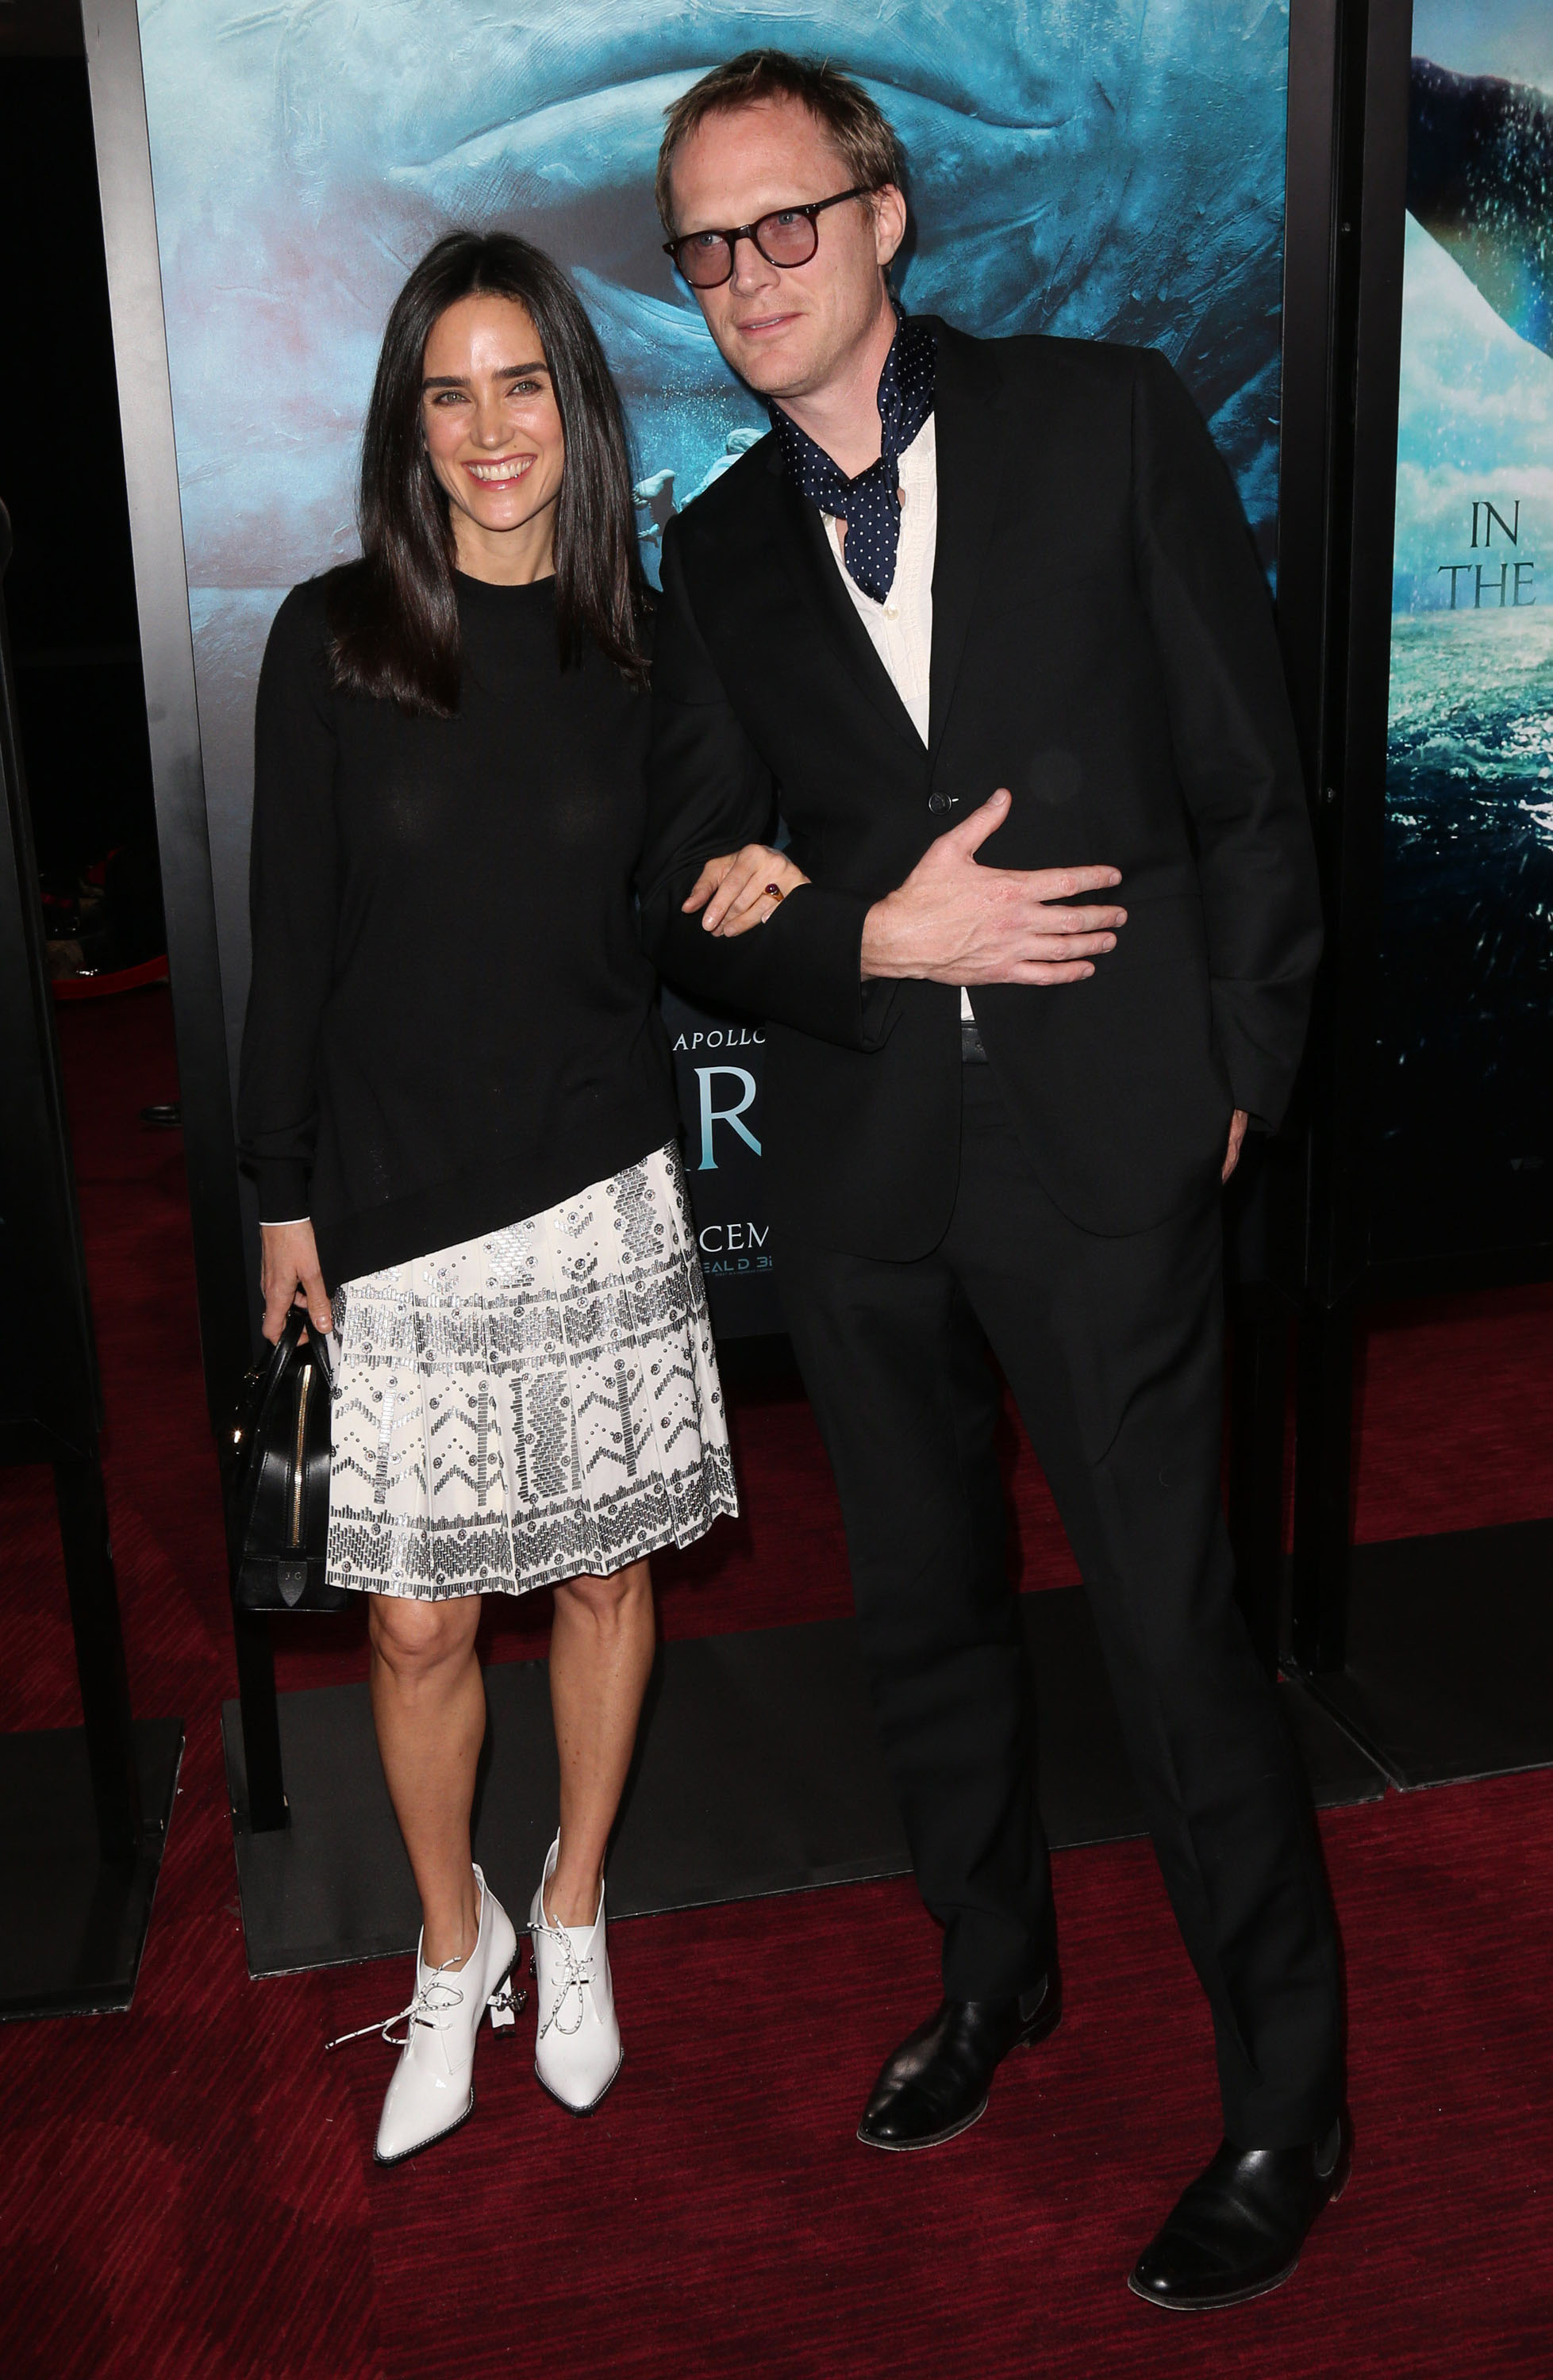 Fug or Fab: Jennifer Connelly and Paul Bettany